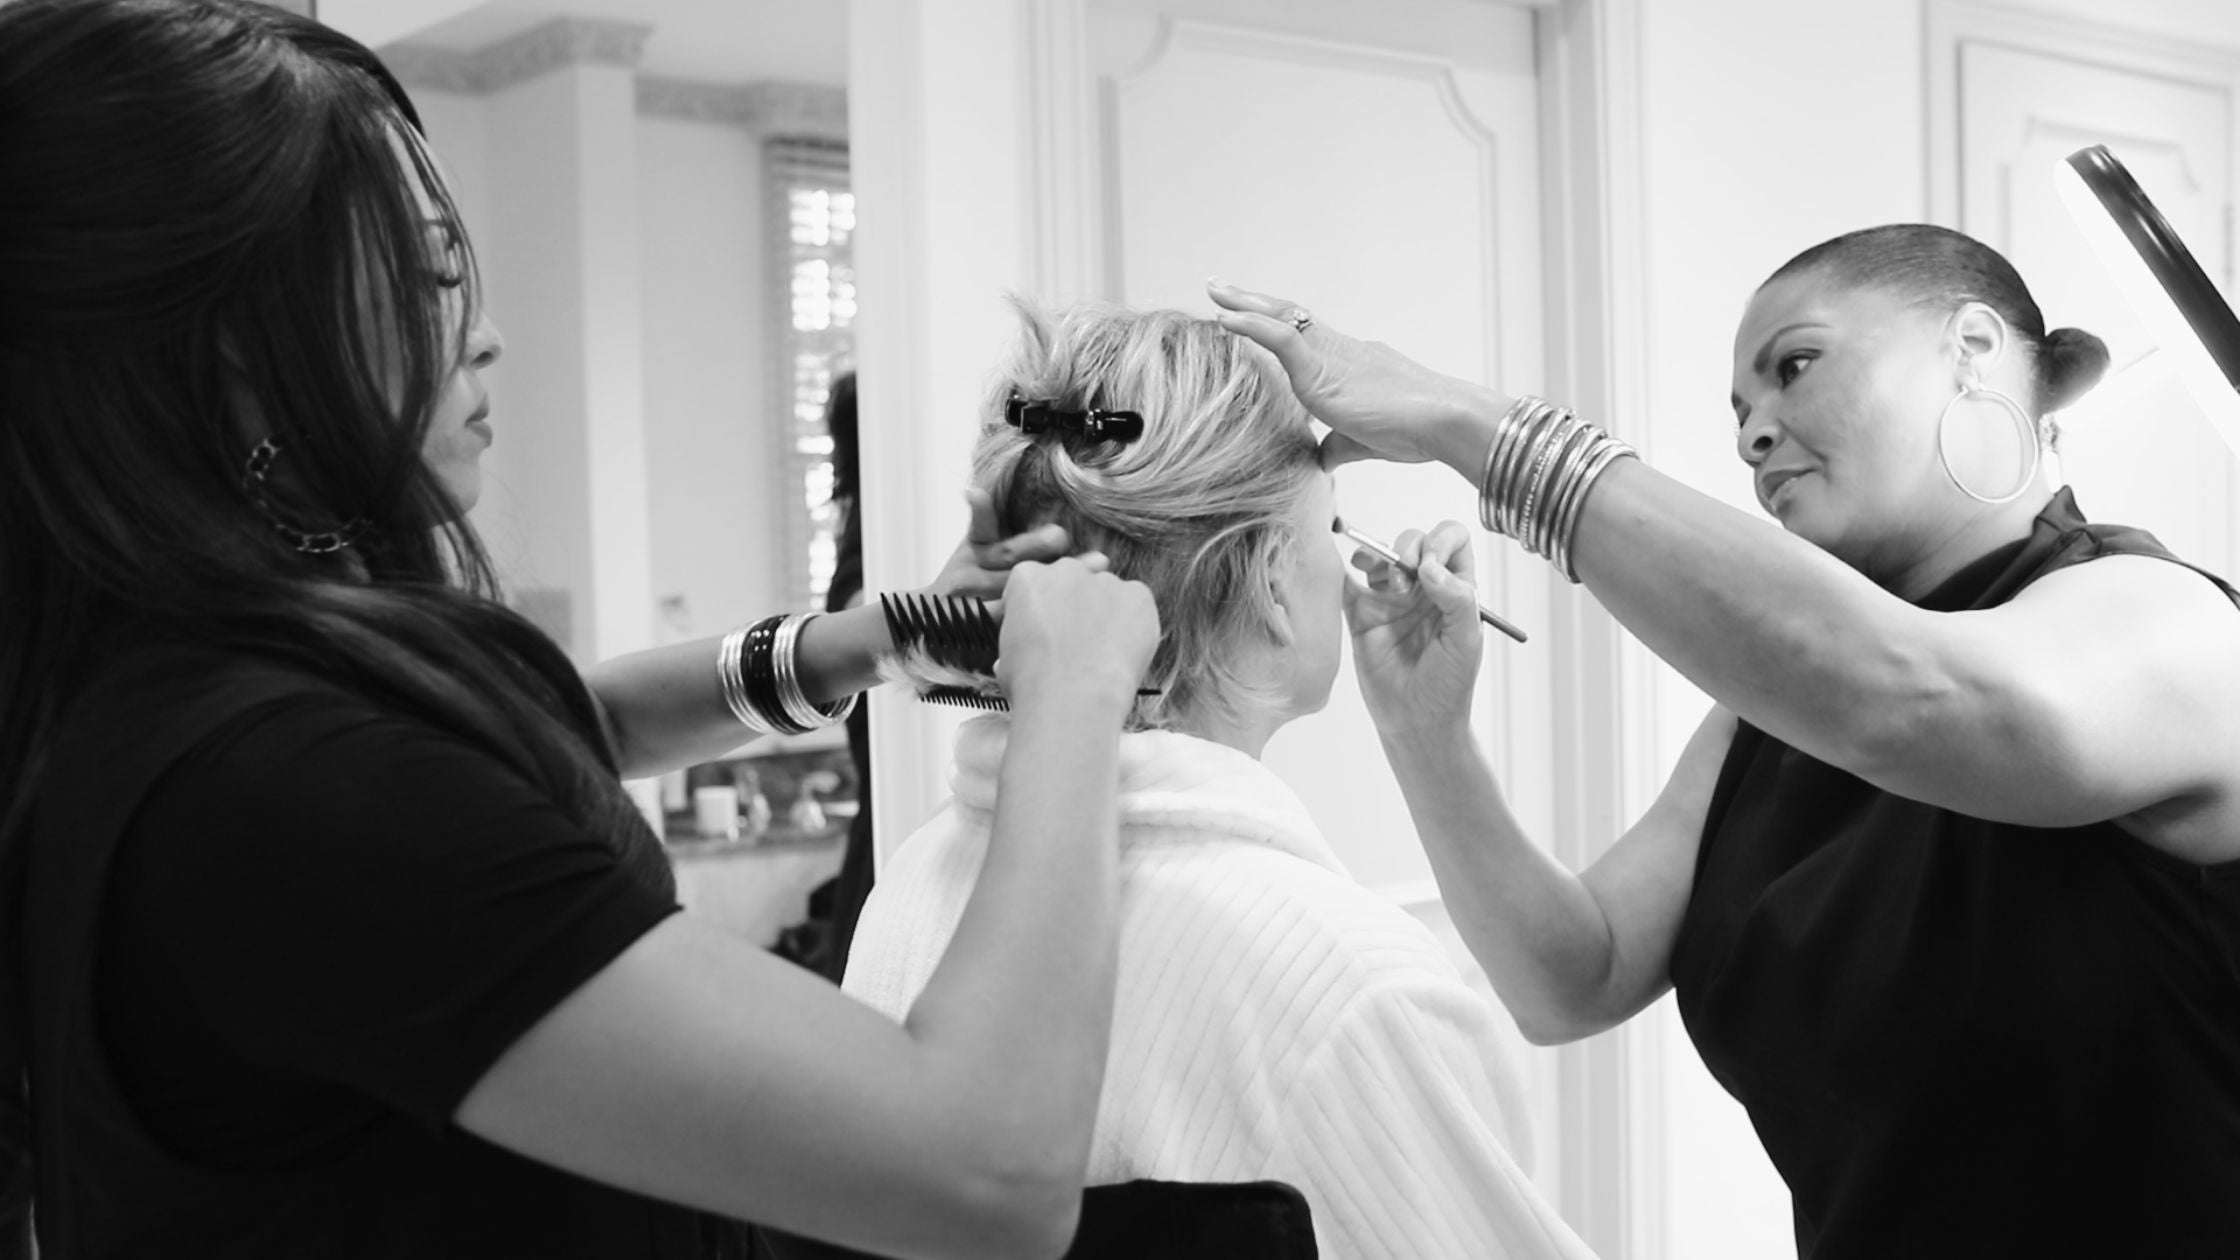 Jessica Jesse getting her hair and makeup done for her photoshoot with the legendary Ruven Afanador | BuDhaGirl